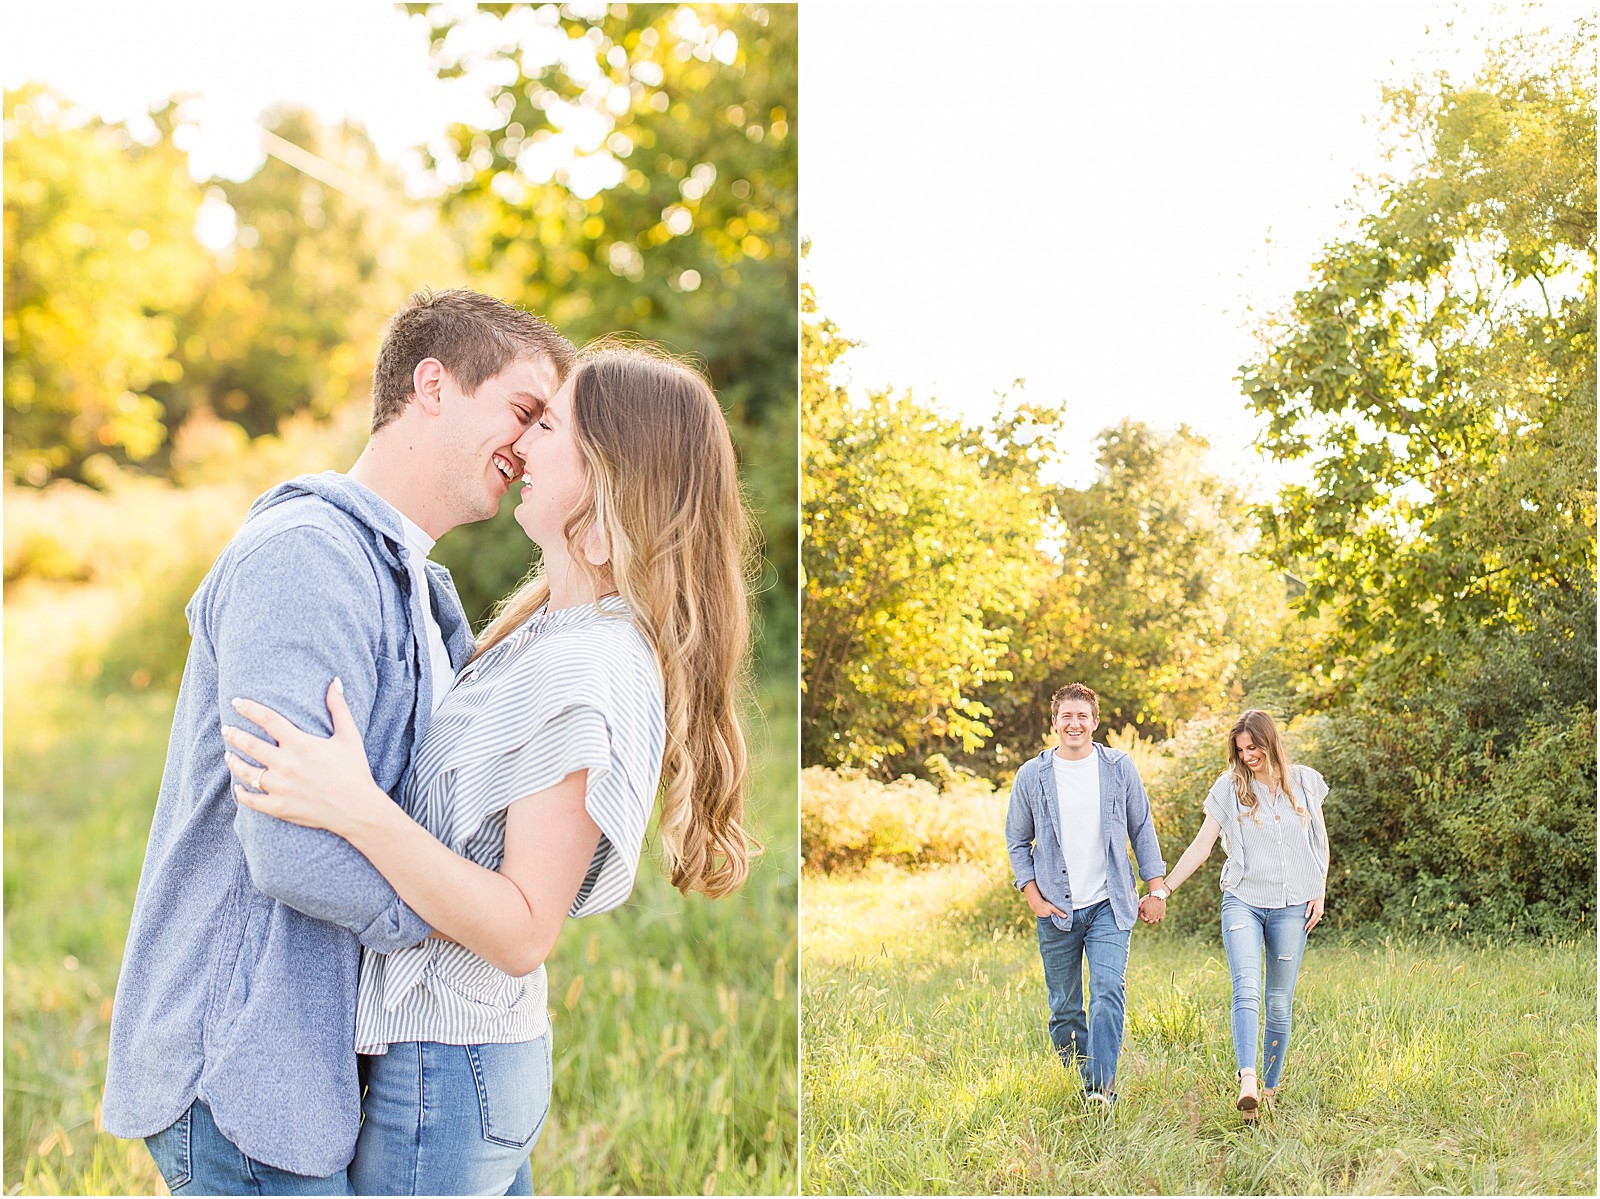 A Jasper Indiana Engagement Session | Tori and Kyle | Bret and Brandie Photography005.jpg